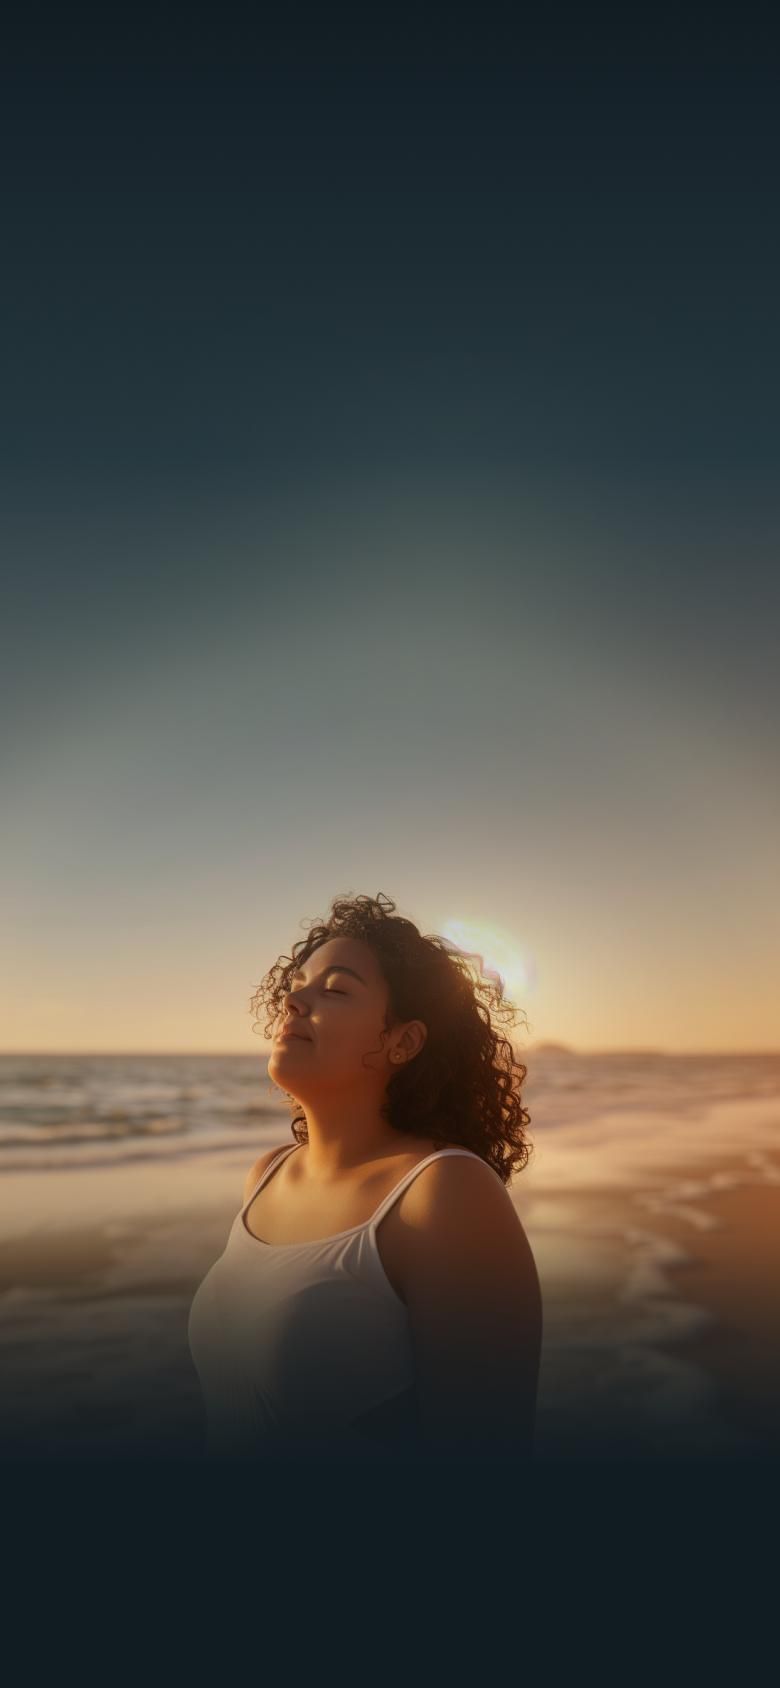 A woman with curly hair stands on a beach at sunset, eyes closed and serene.